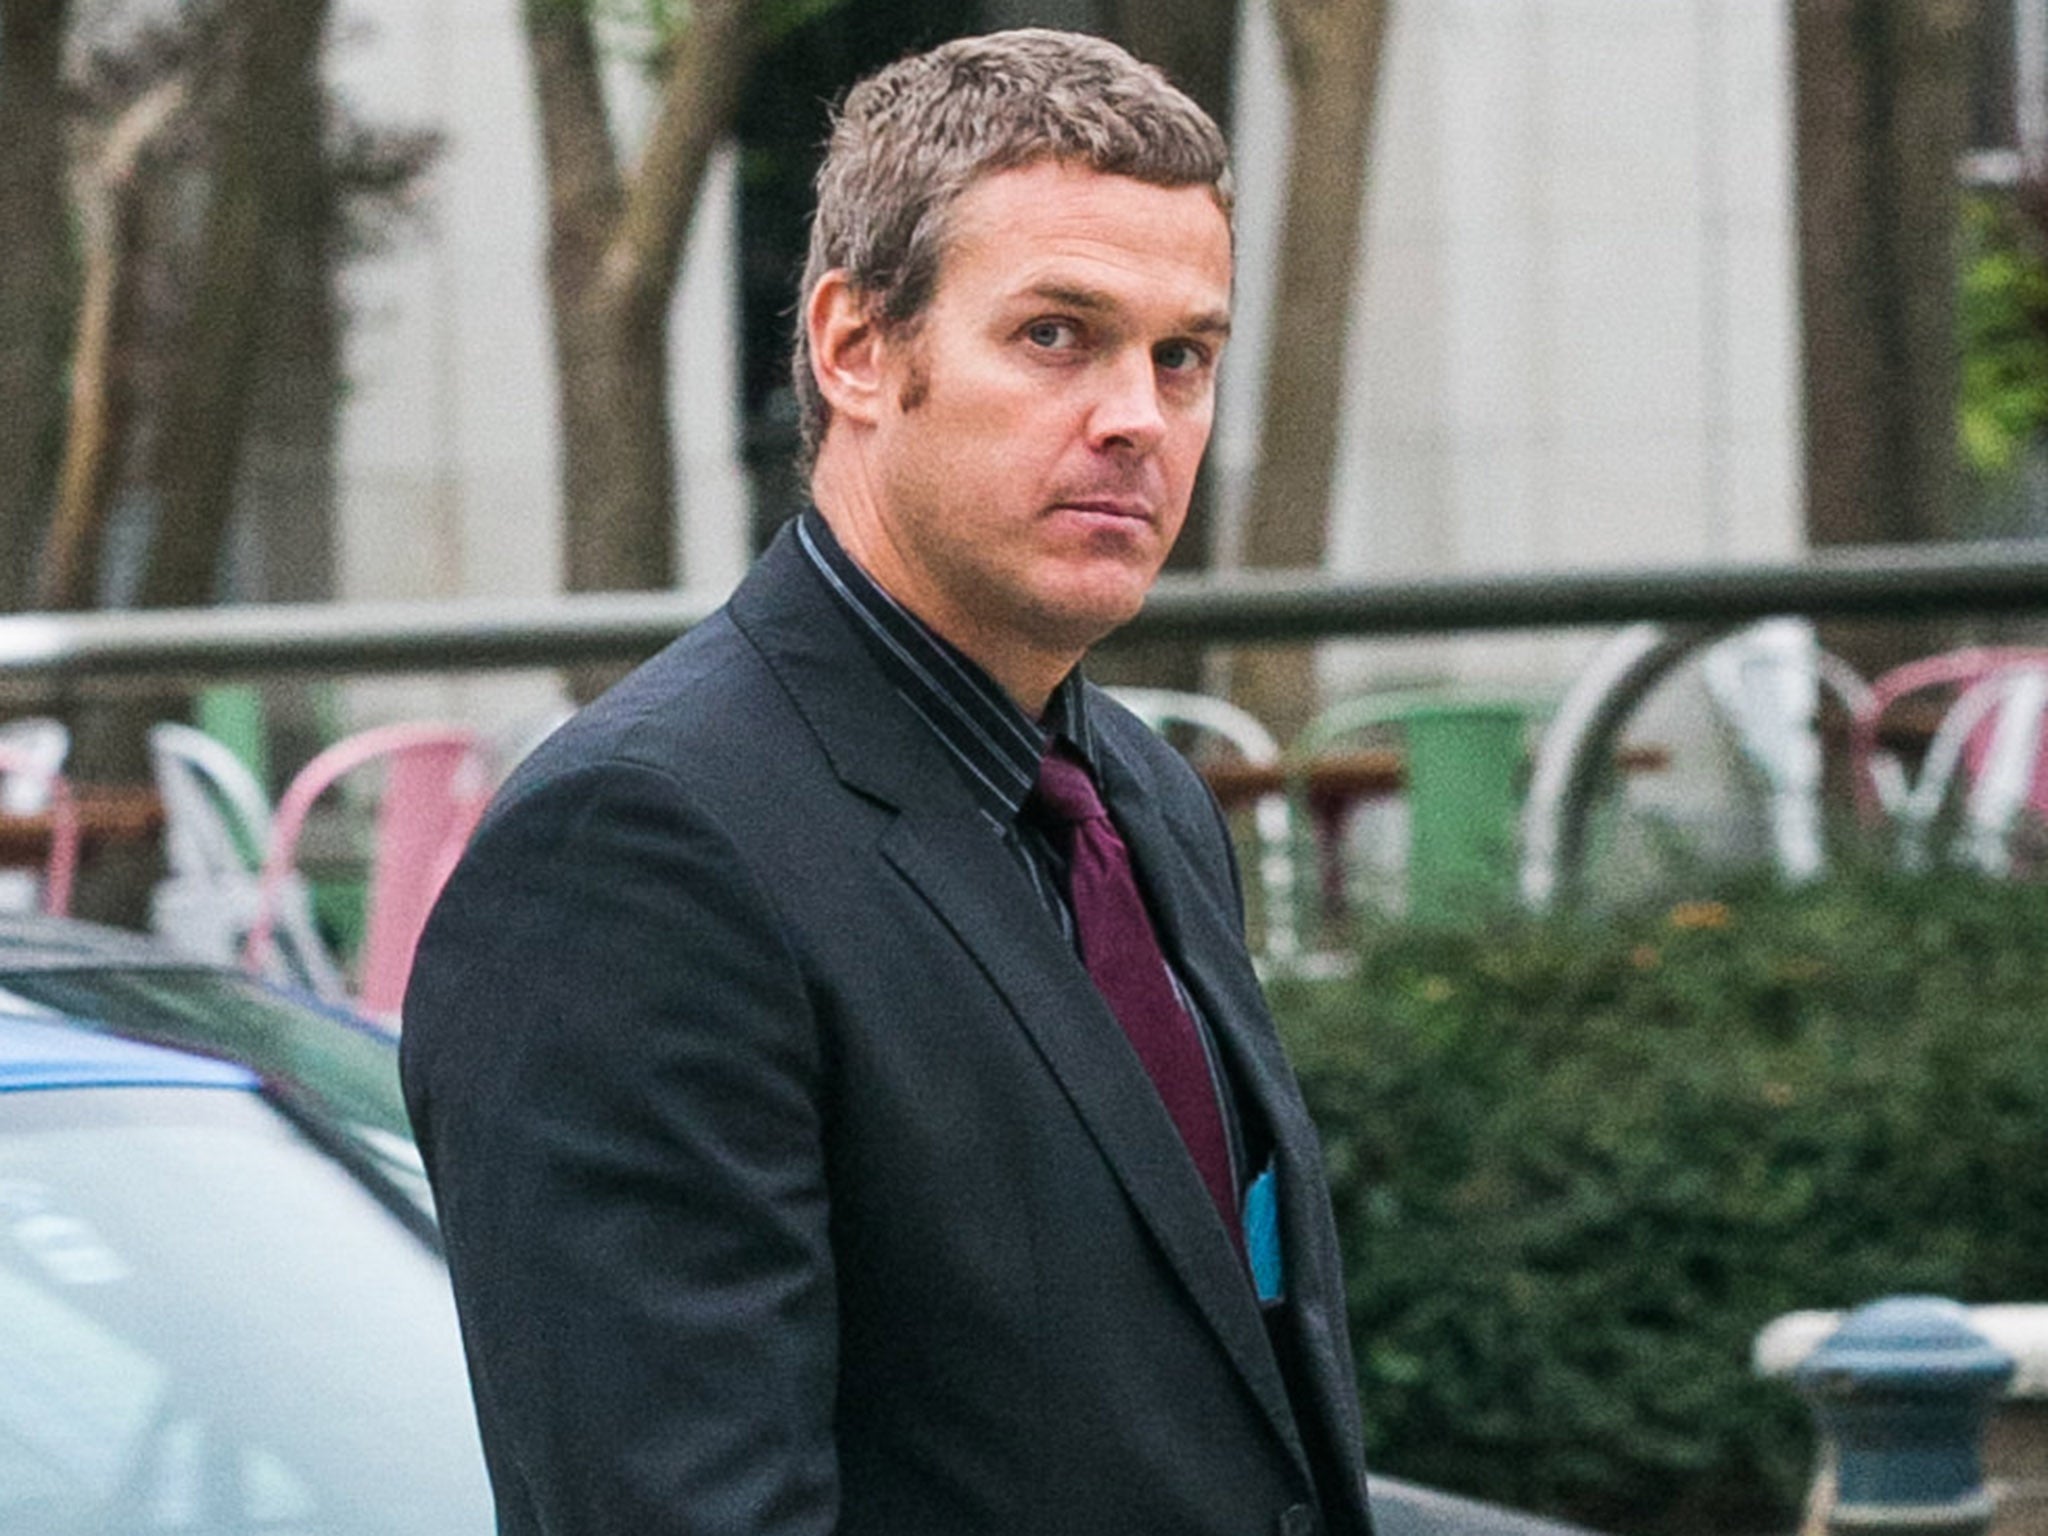 Wouter Fourie leaves Plymouth Crown Court